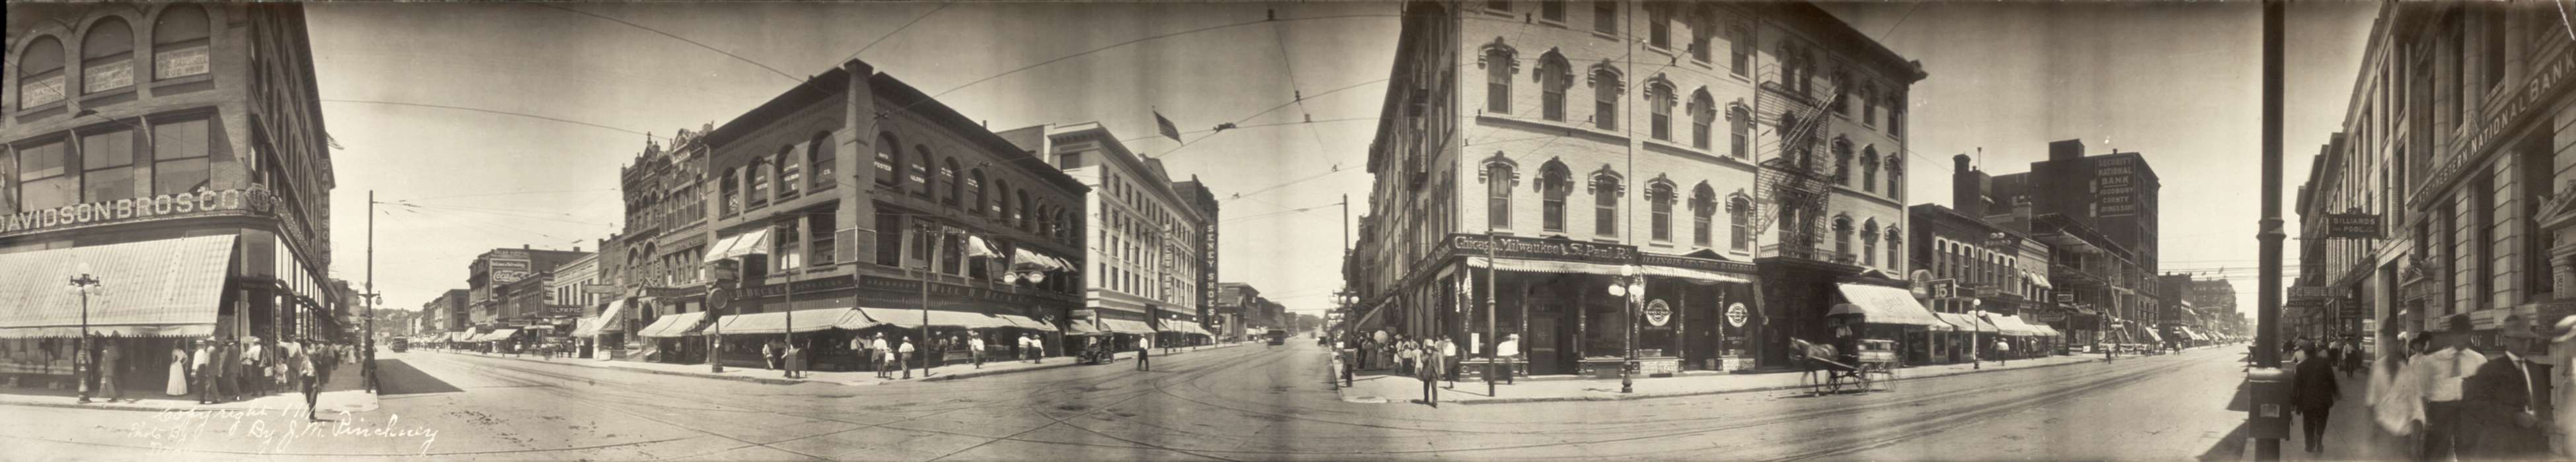 buildings, mainstreet, history of Iowa, storefront, dirt street, Cities and Towns, Iowa History, panorama, Library of Congress, storefront awning, Main Streets & Town Squares, Iowa